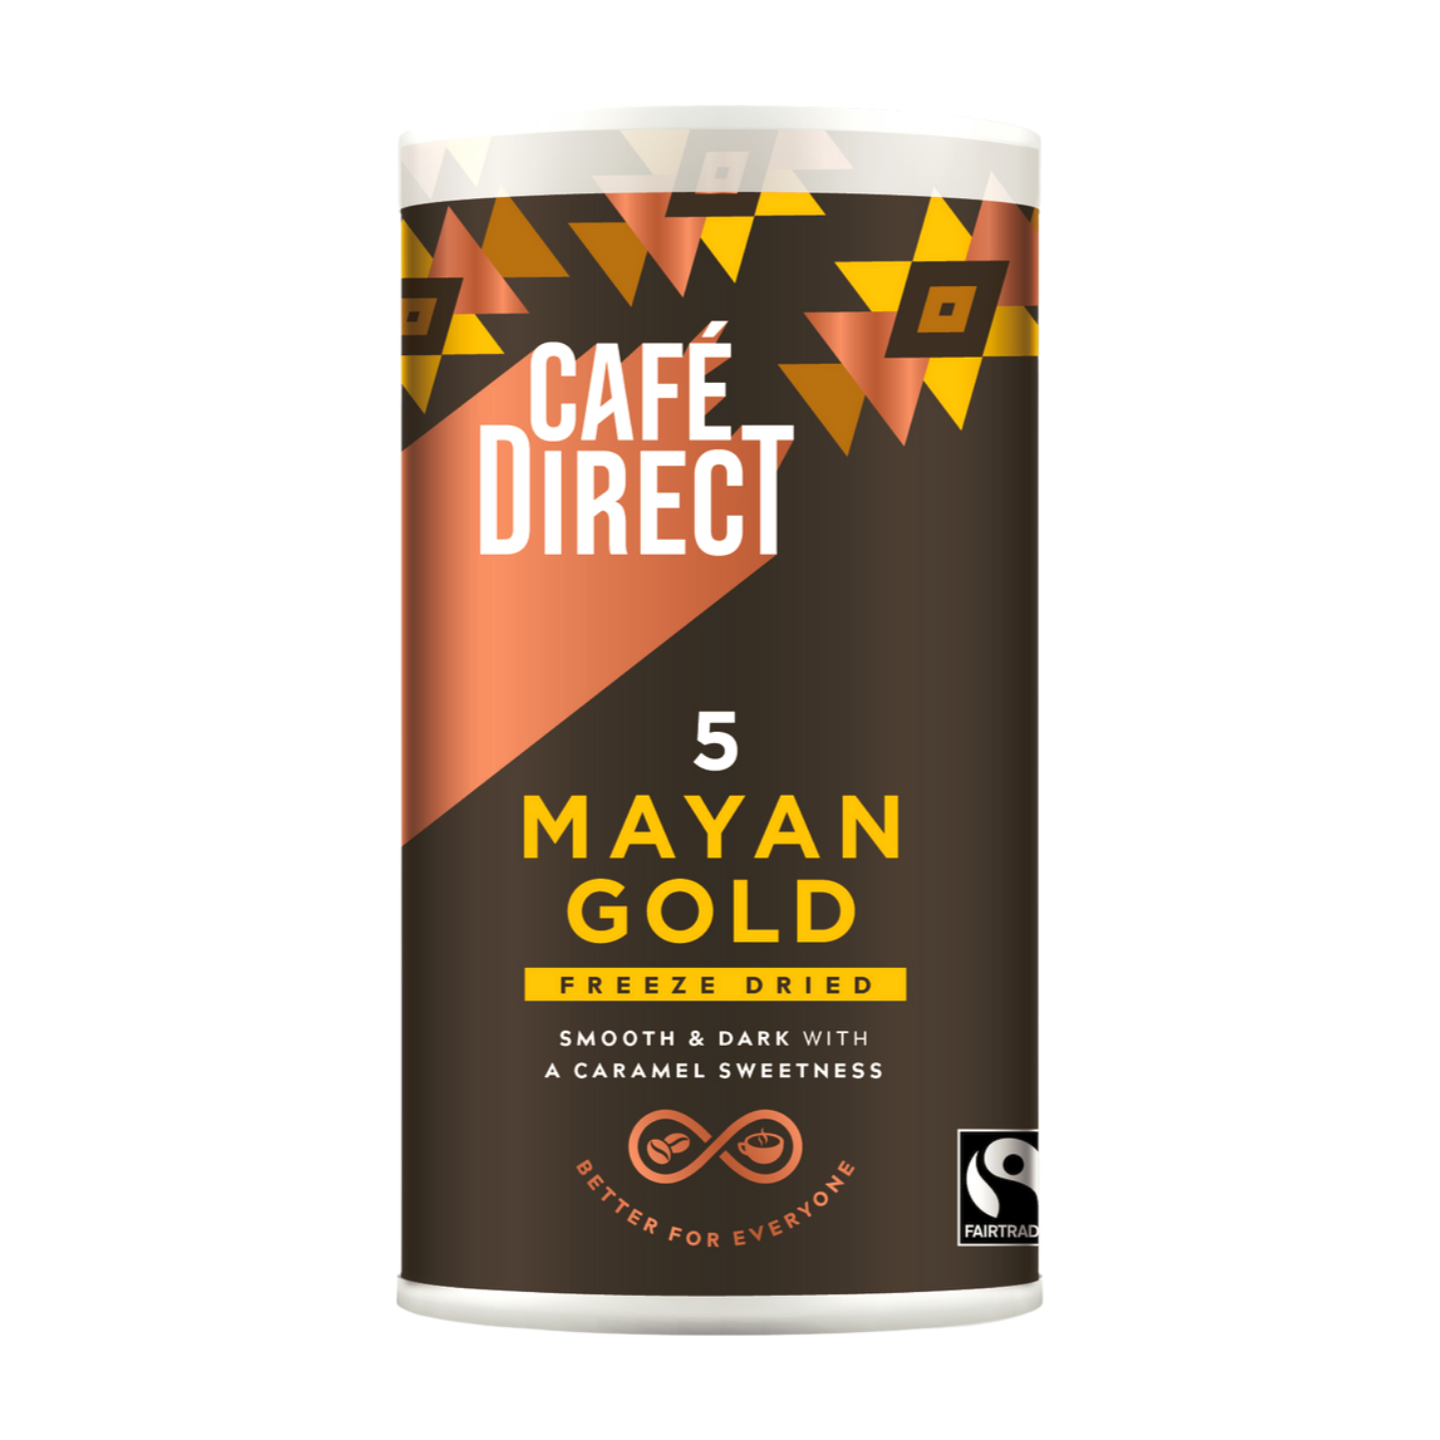 Cafe Direct Mayan Gold Freeze Dried Decaf Coffee (100g)